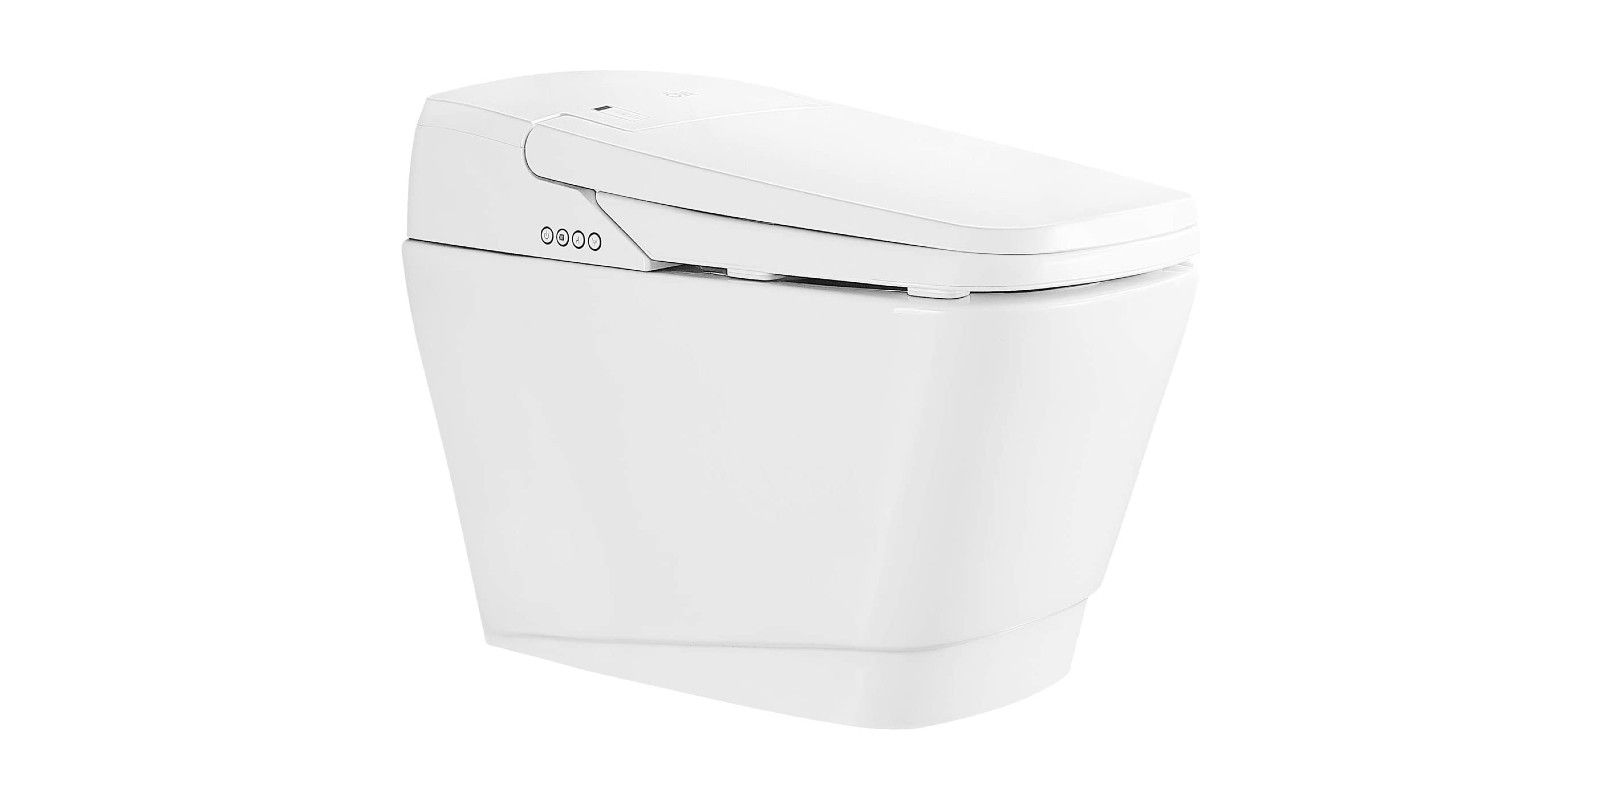 A photo showing the side view of the OVE Decors Vovo Smart Toilet